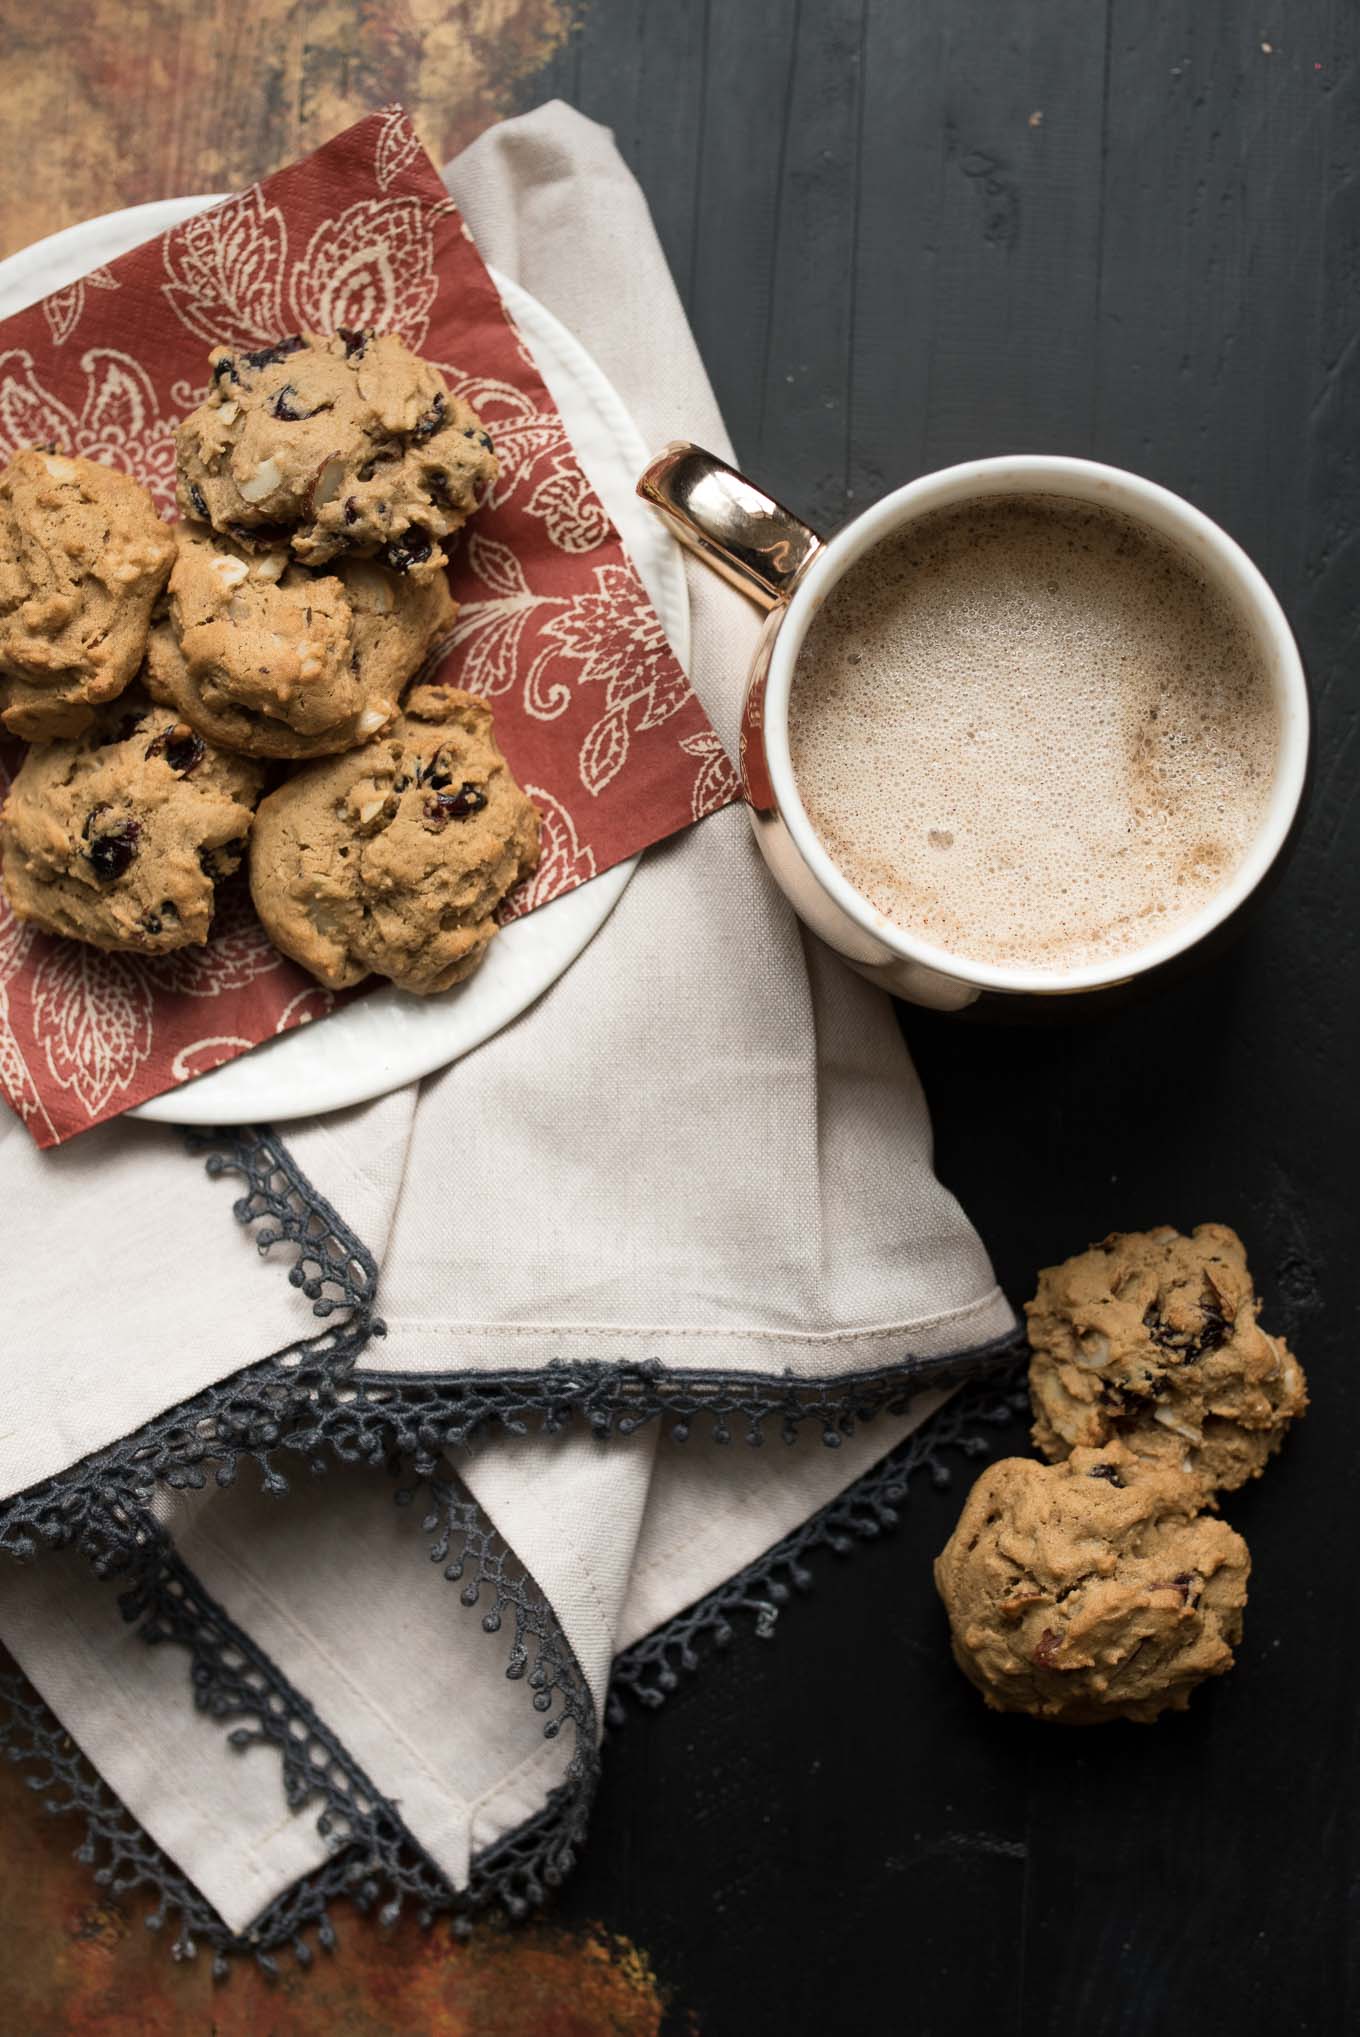 Cranberry Almond Spice Cookies- the perfect spiced cookie to dunk in your coffee. Not too sweet, but tons of flavor! #ad | www.nutritiouseats.com